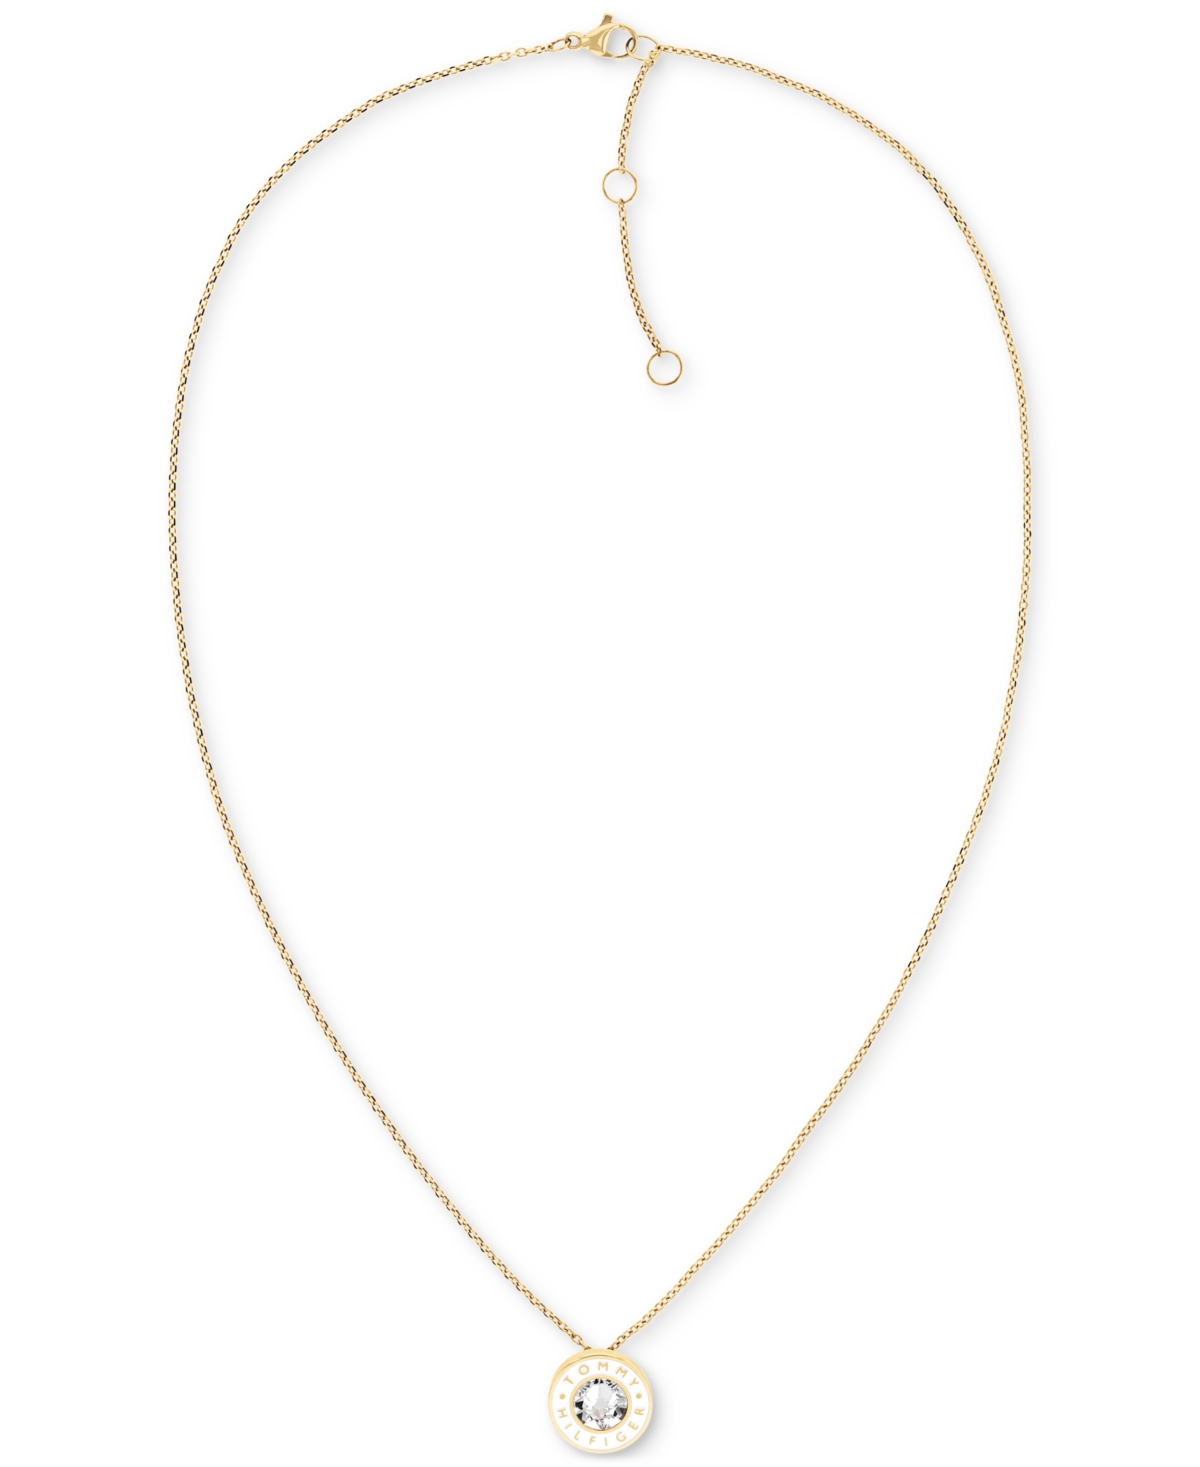 Tommy Hilfiger Gold-tone White Stone Pendant Necklace, 18" + 2" Extender